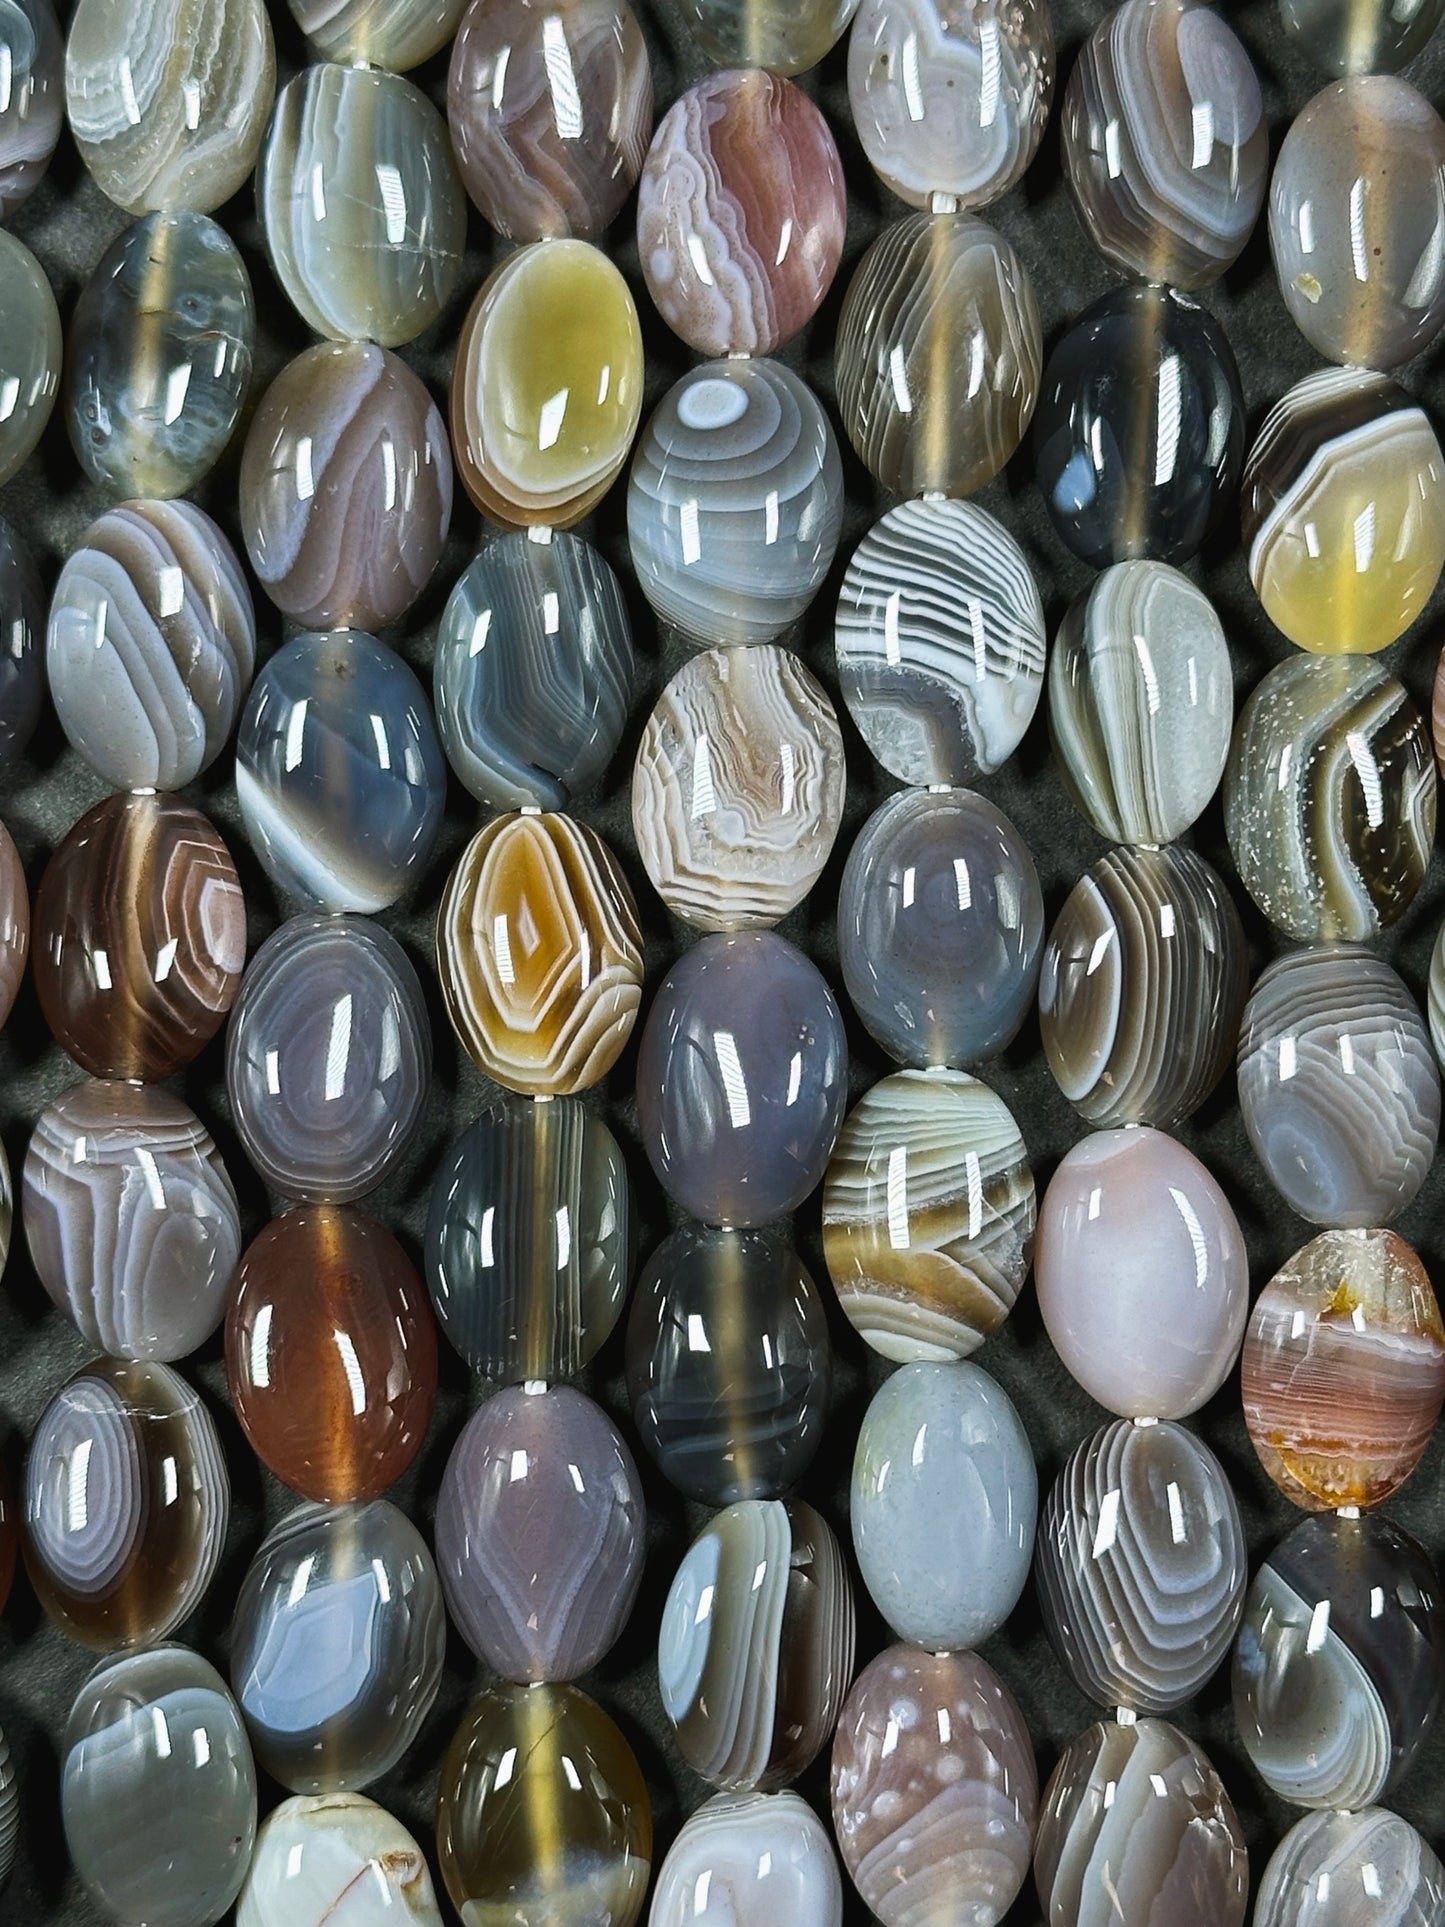 AAA Natural Botswana Agate Gemstone Bead 10x14mm Oval Shape, Beautiful Natural Gray Brown Color Agate, Excellent Quality Full Strand 15.5"